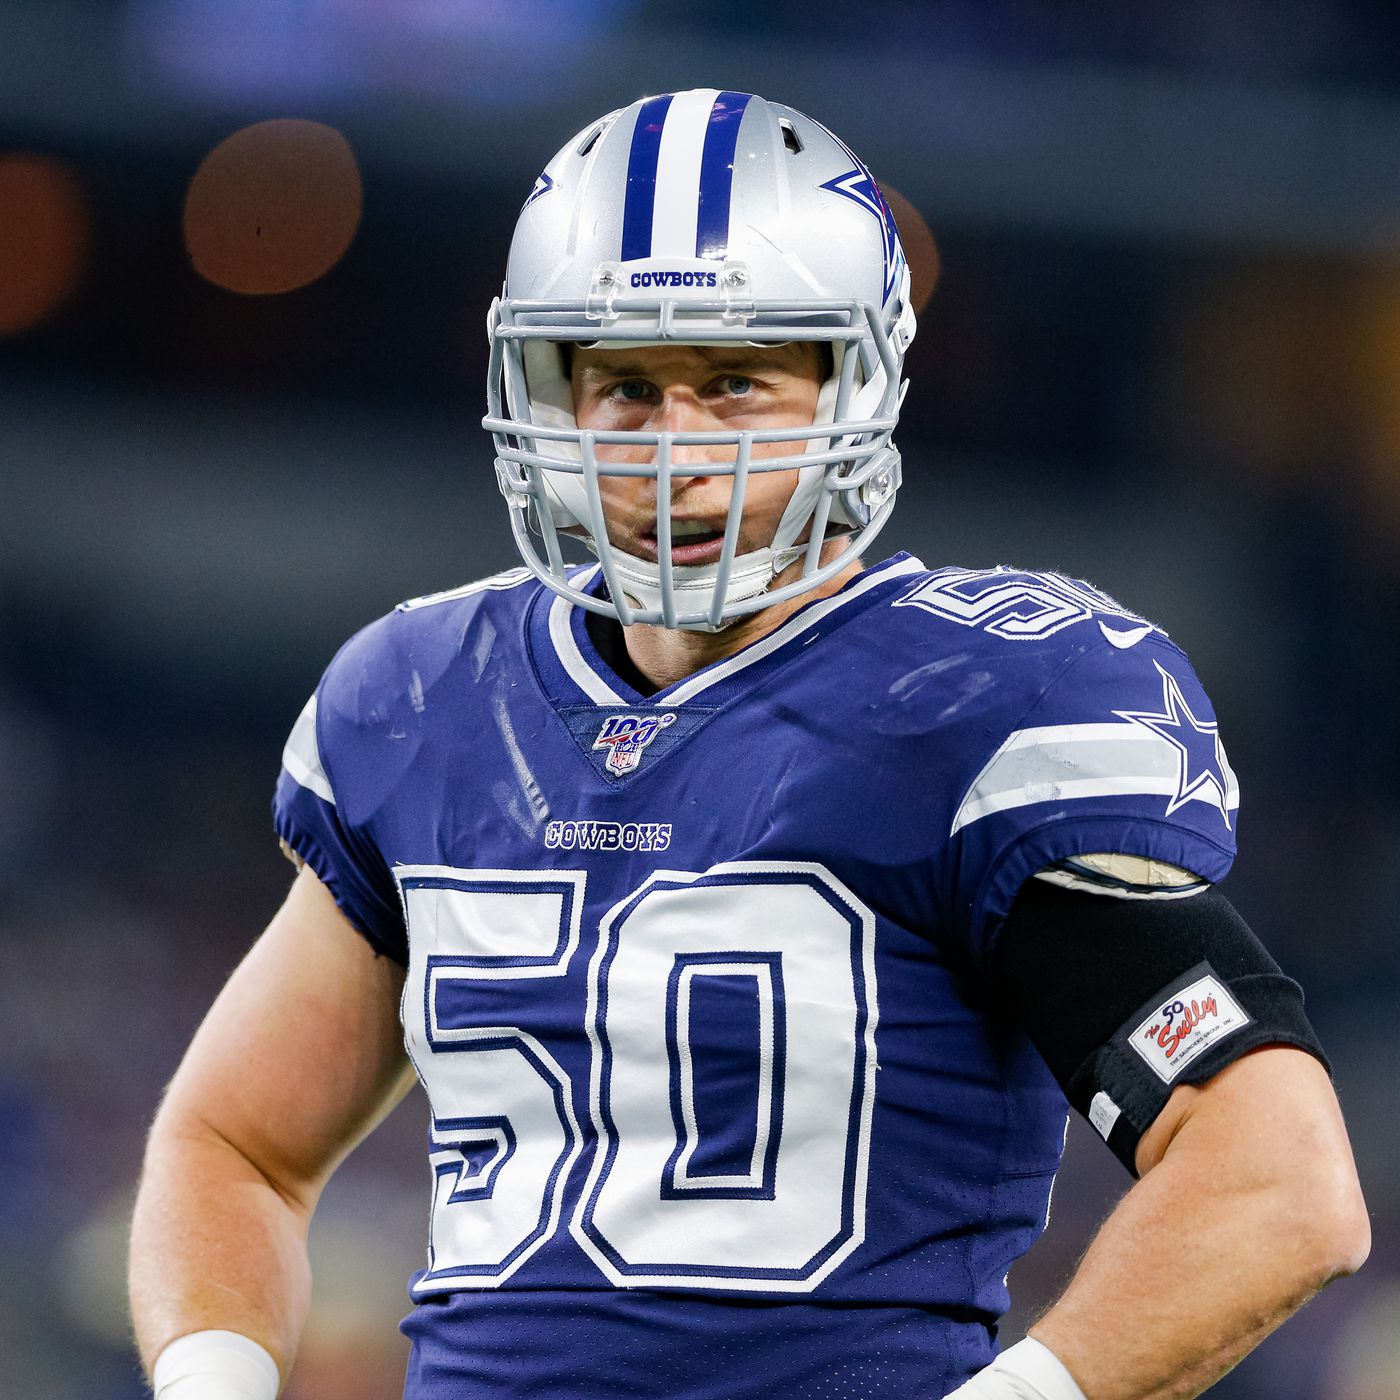 Sean Lee to play in 2020, but LB's status with Cowboys remains